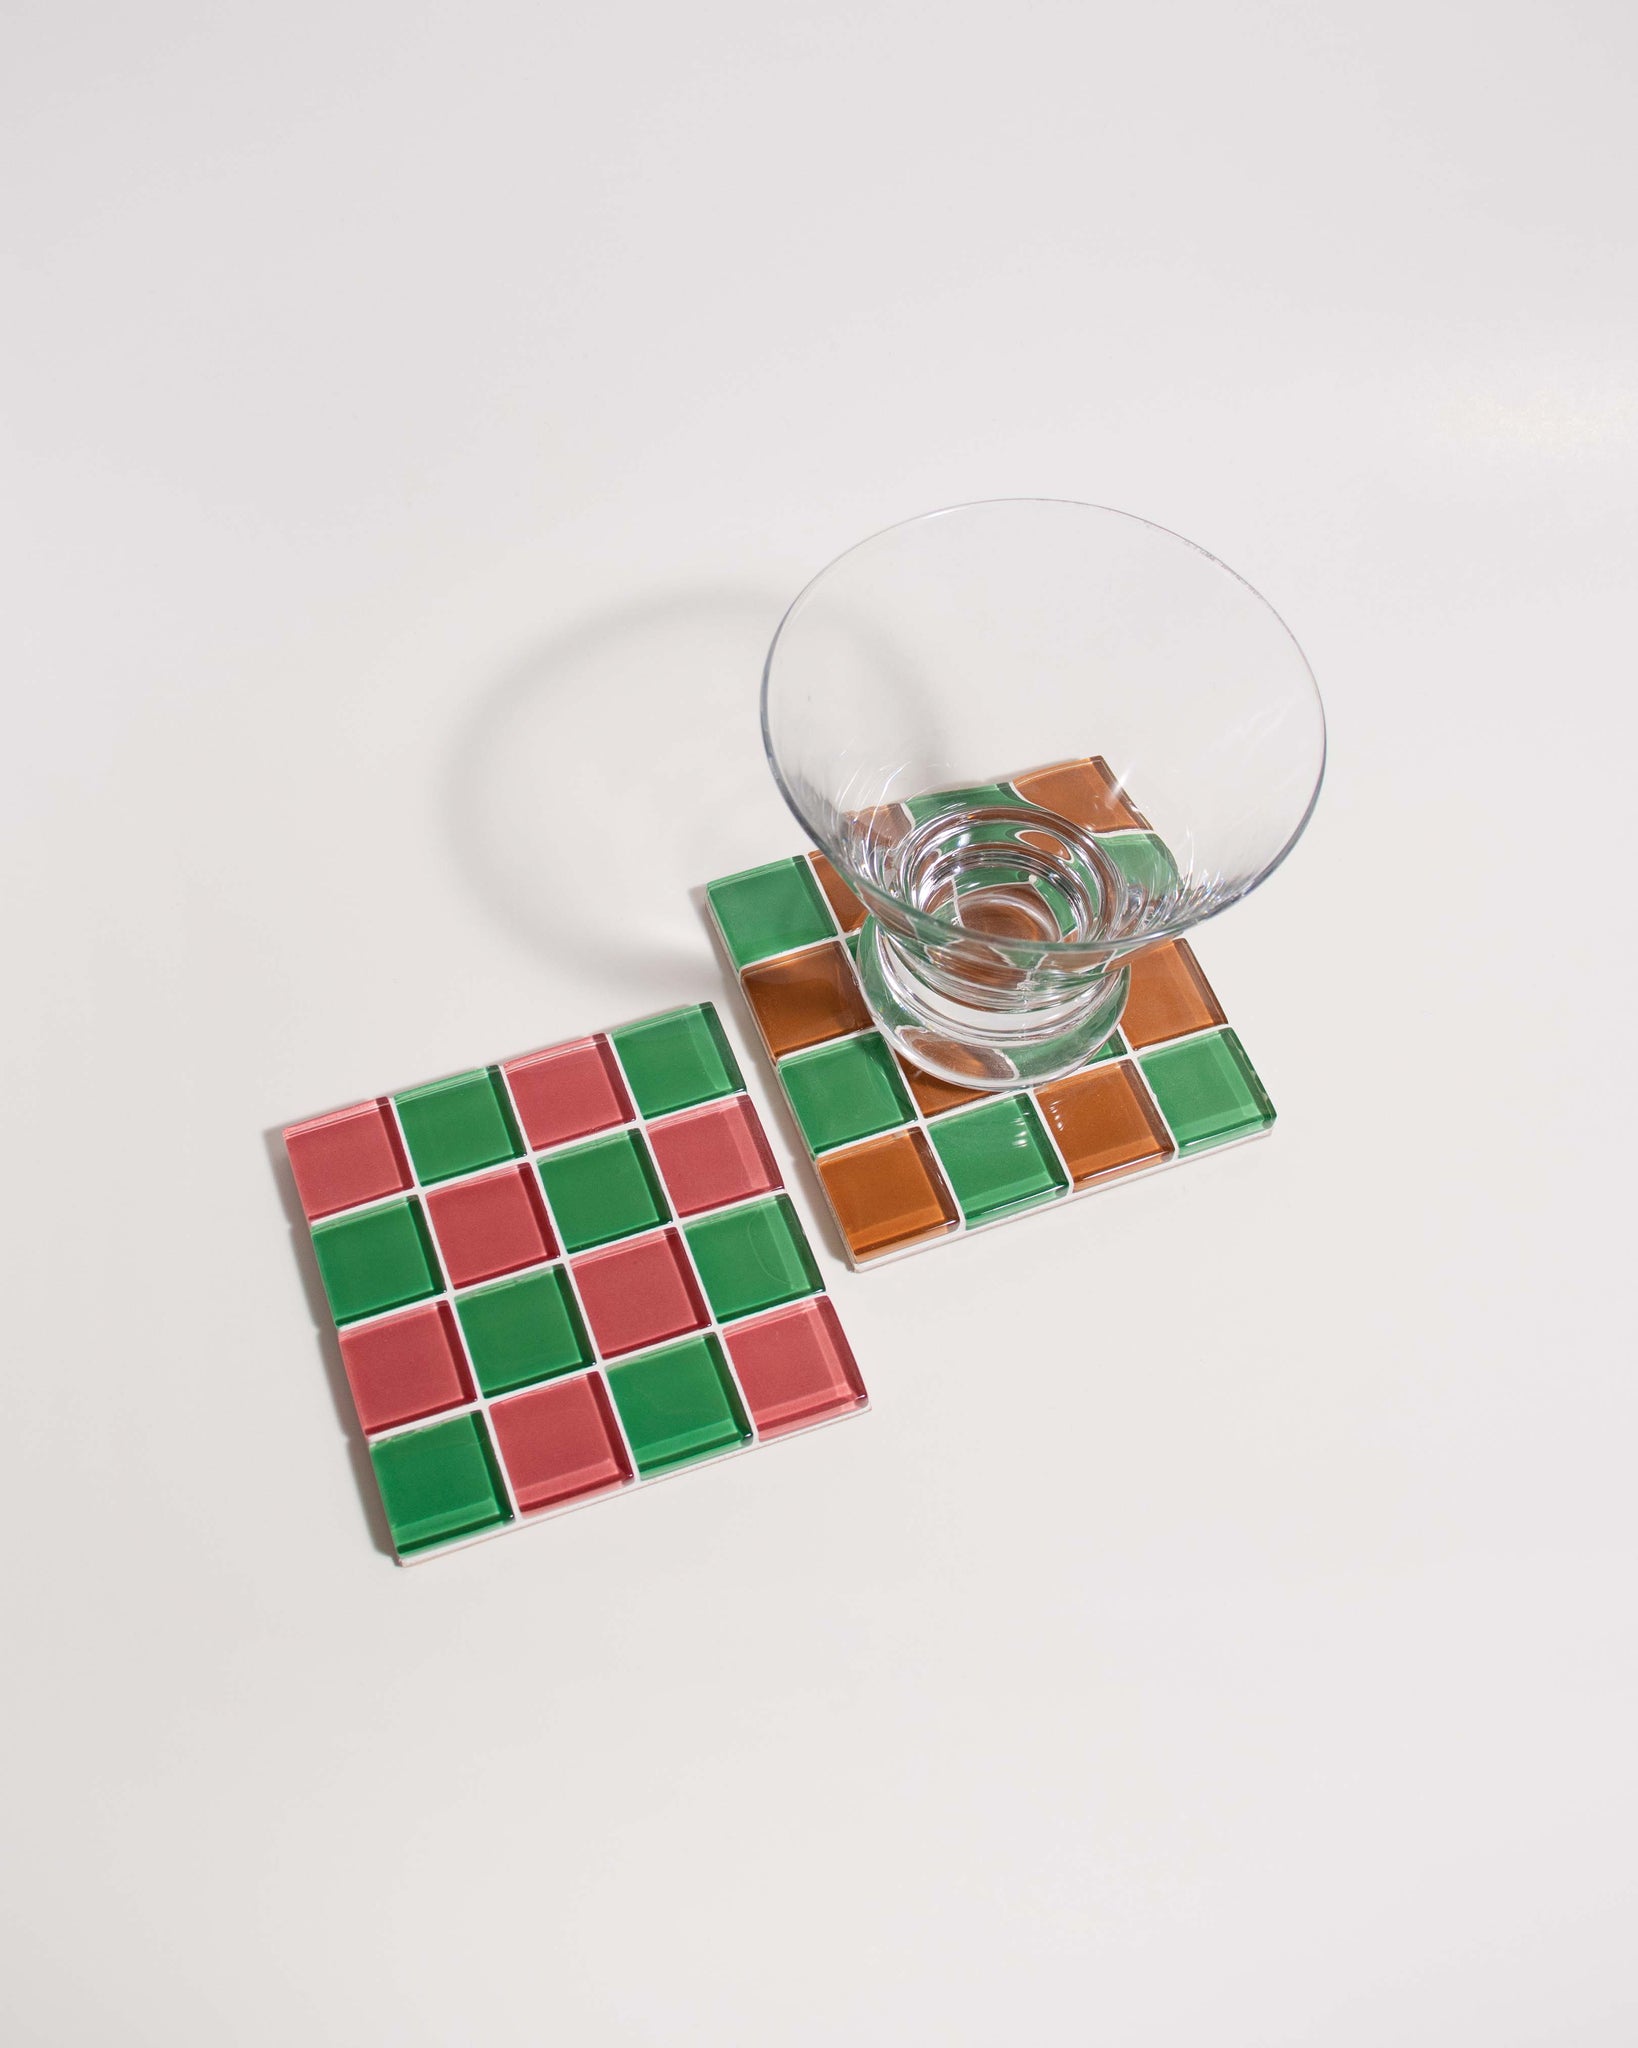 GLASS TILE COASTER - Sweater Weather